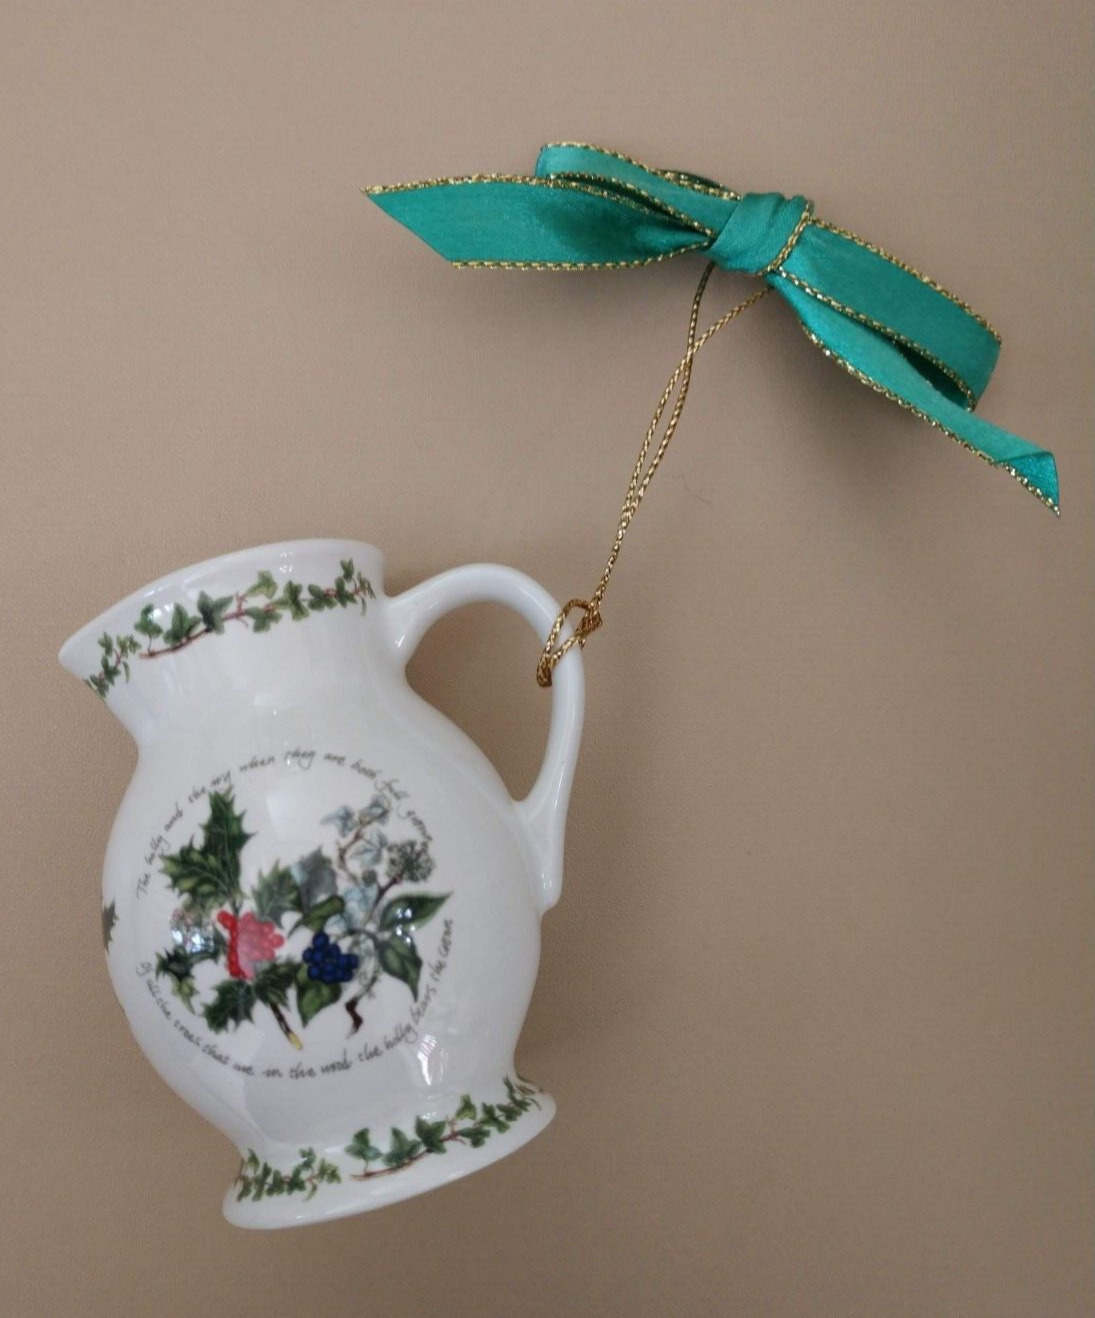 Portmeirion Holly & Ivy Pitcher Ornament - 2 3/4 inch